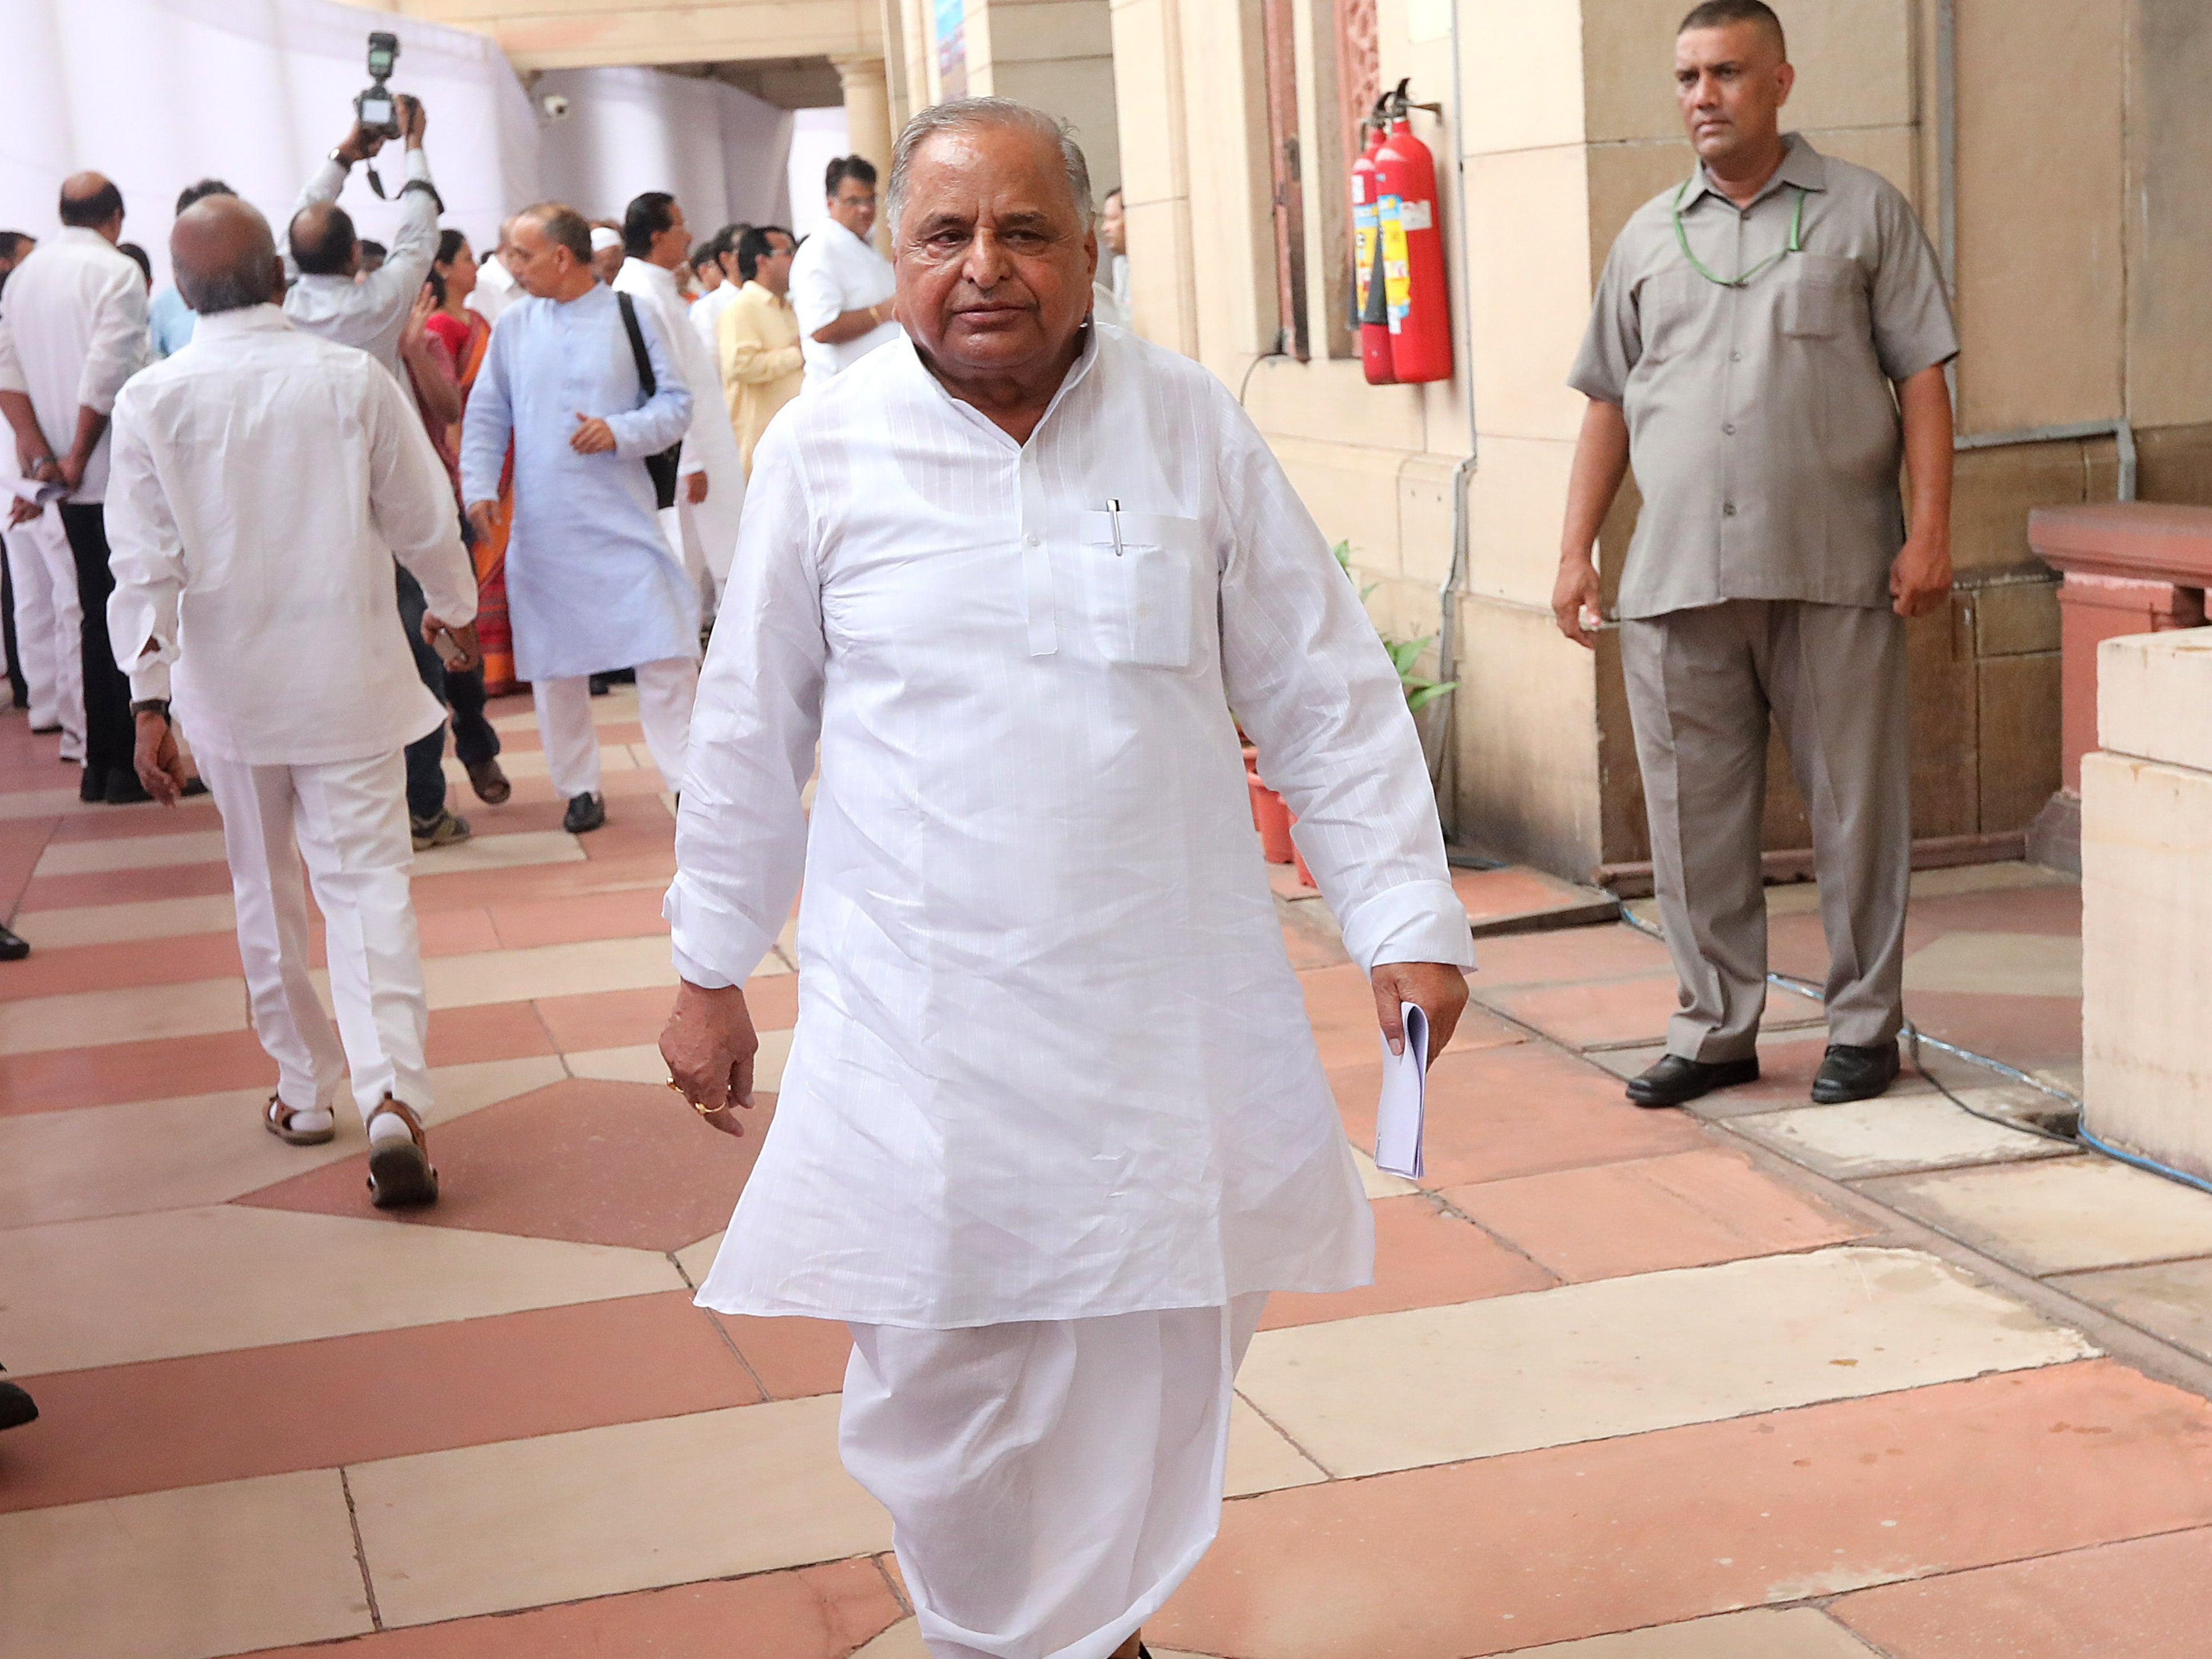 Mulayam Singh Yadav Veteran Politician And Three Time Chief Minister Of Largest Indian State